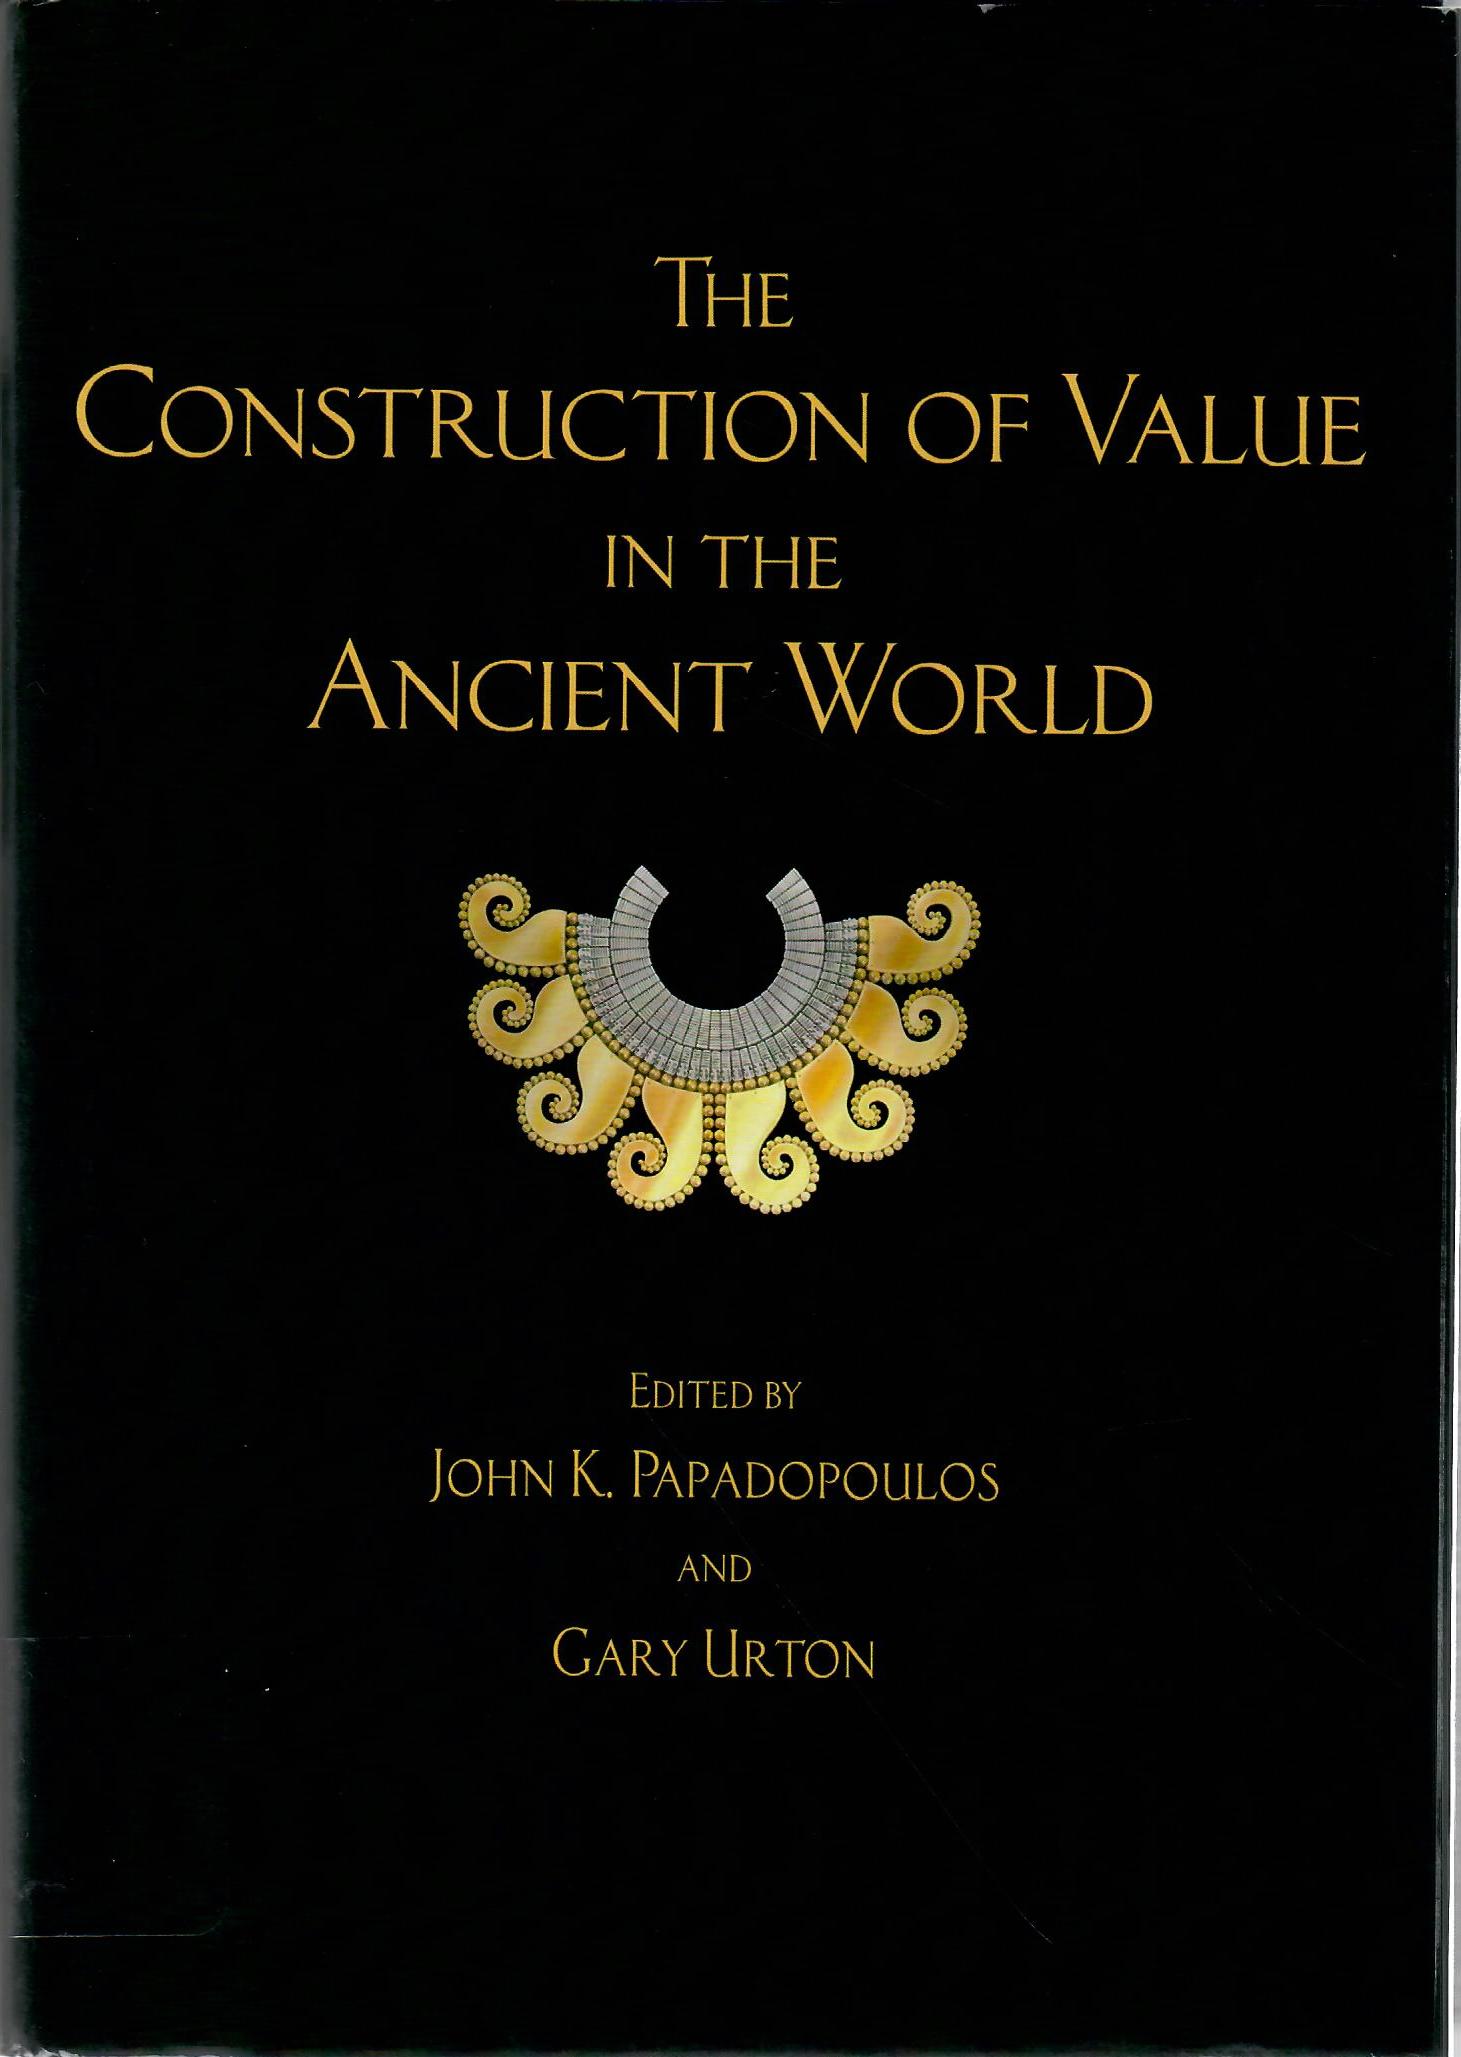 THE CONSTRUCTION OF VALUE IN THE ANCIENT WORLD